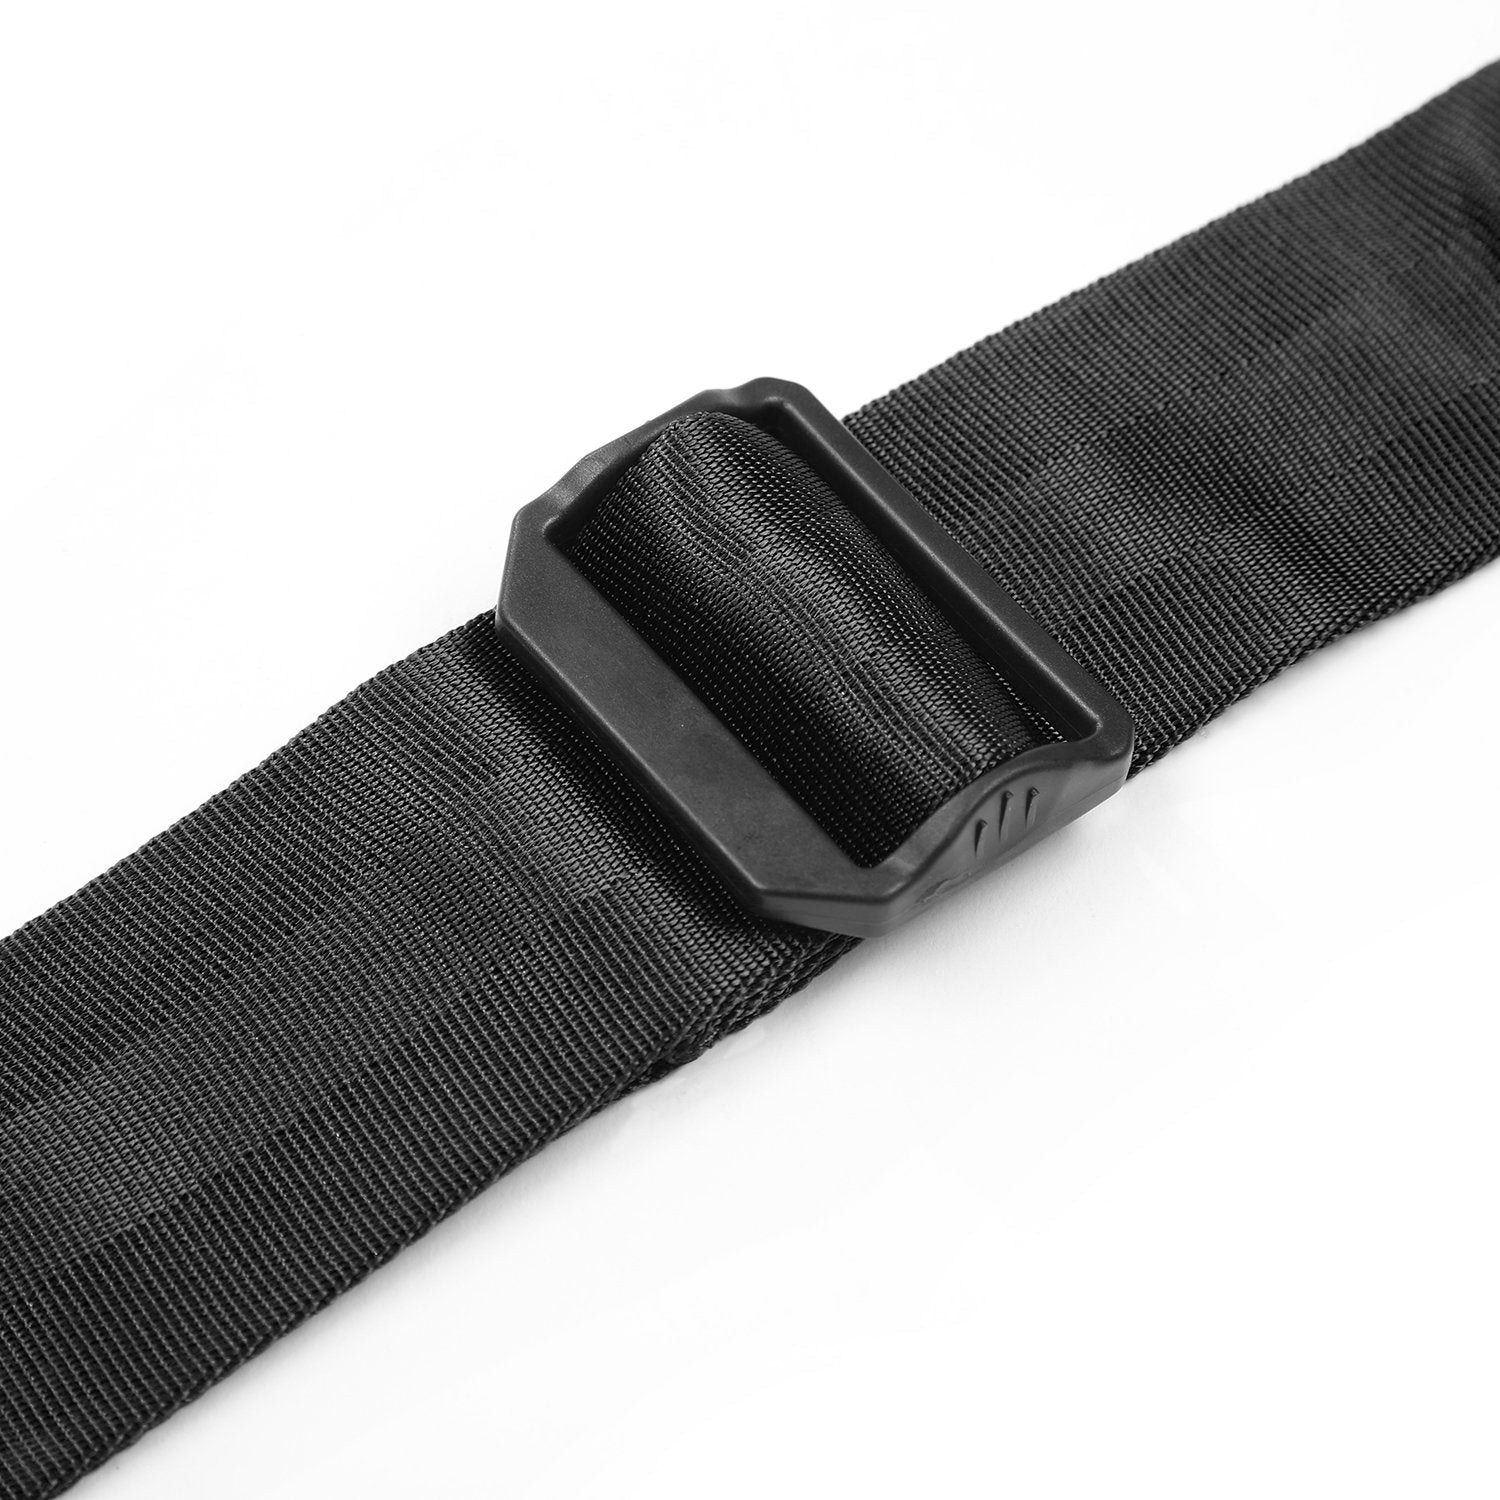 Movo Ultrasoft Nylon-Webbed Shoulder/Sling Camera Strap with Anti-Fatigue Gel Neck Pad for Cameras and Binoculars (Black)  - Acceptable